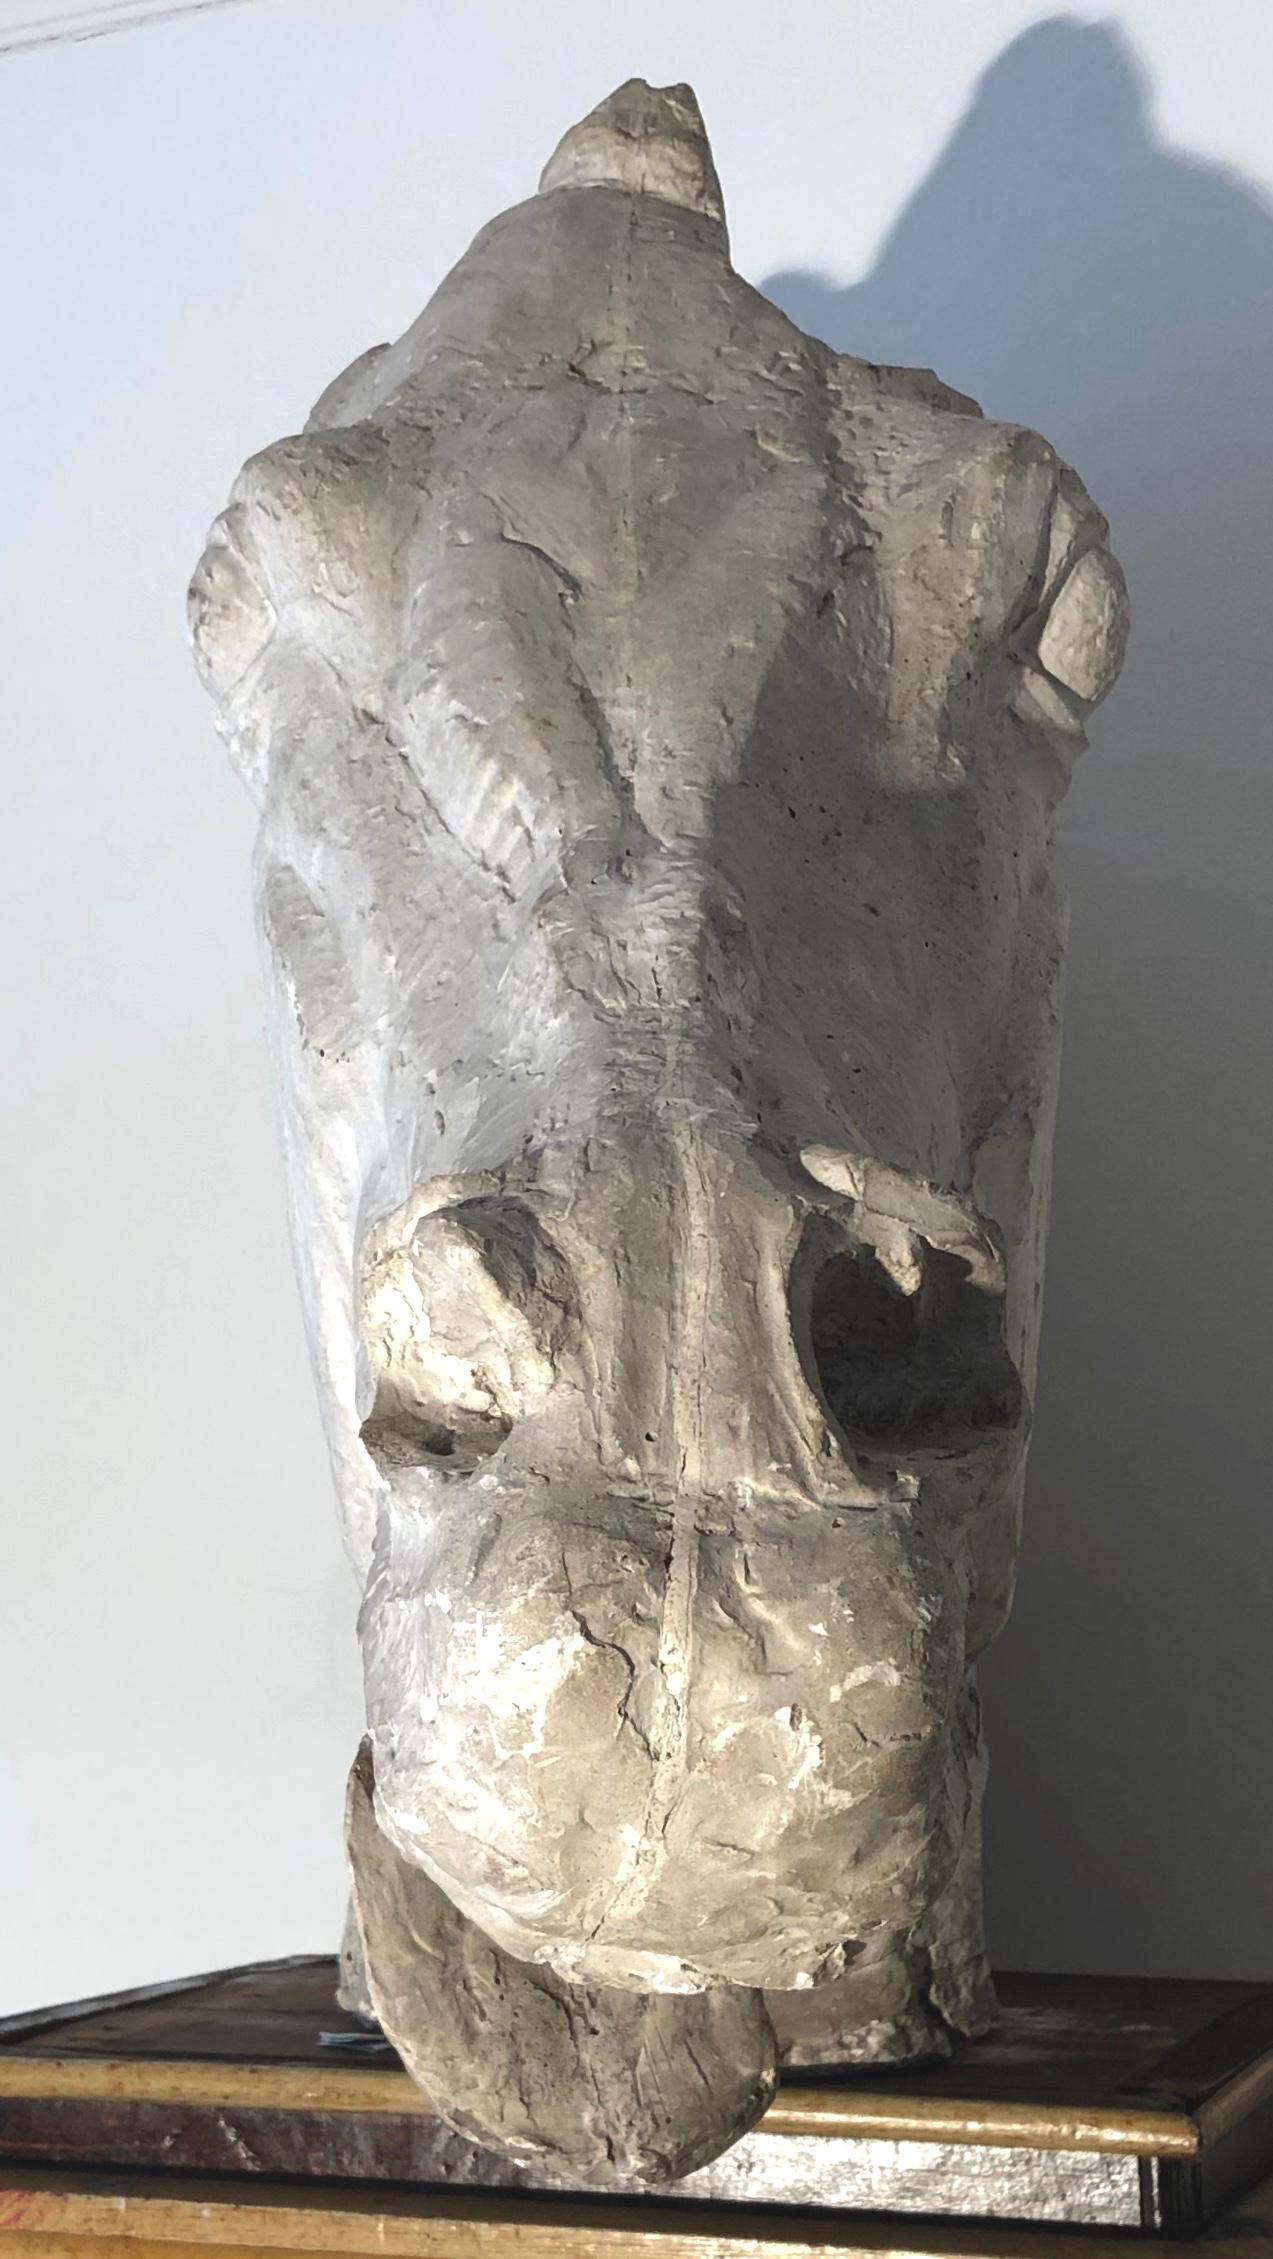 This expressive sculpture of a horse head is executed in the manner of Émile Antoine Bourdelle and made out of plaster.